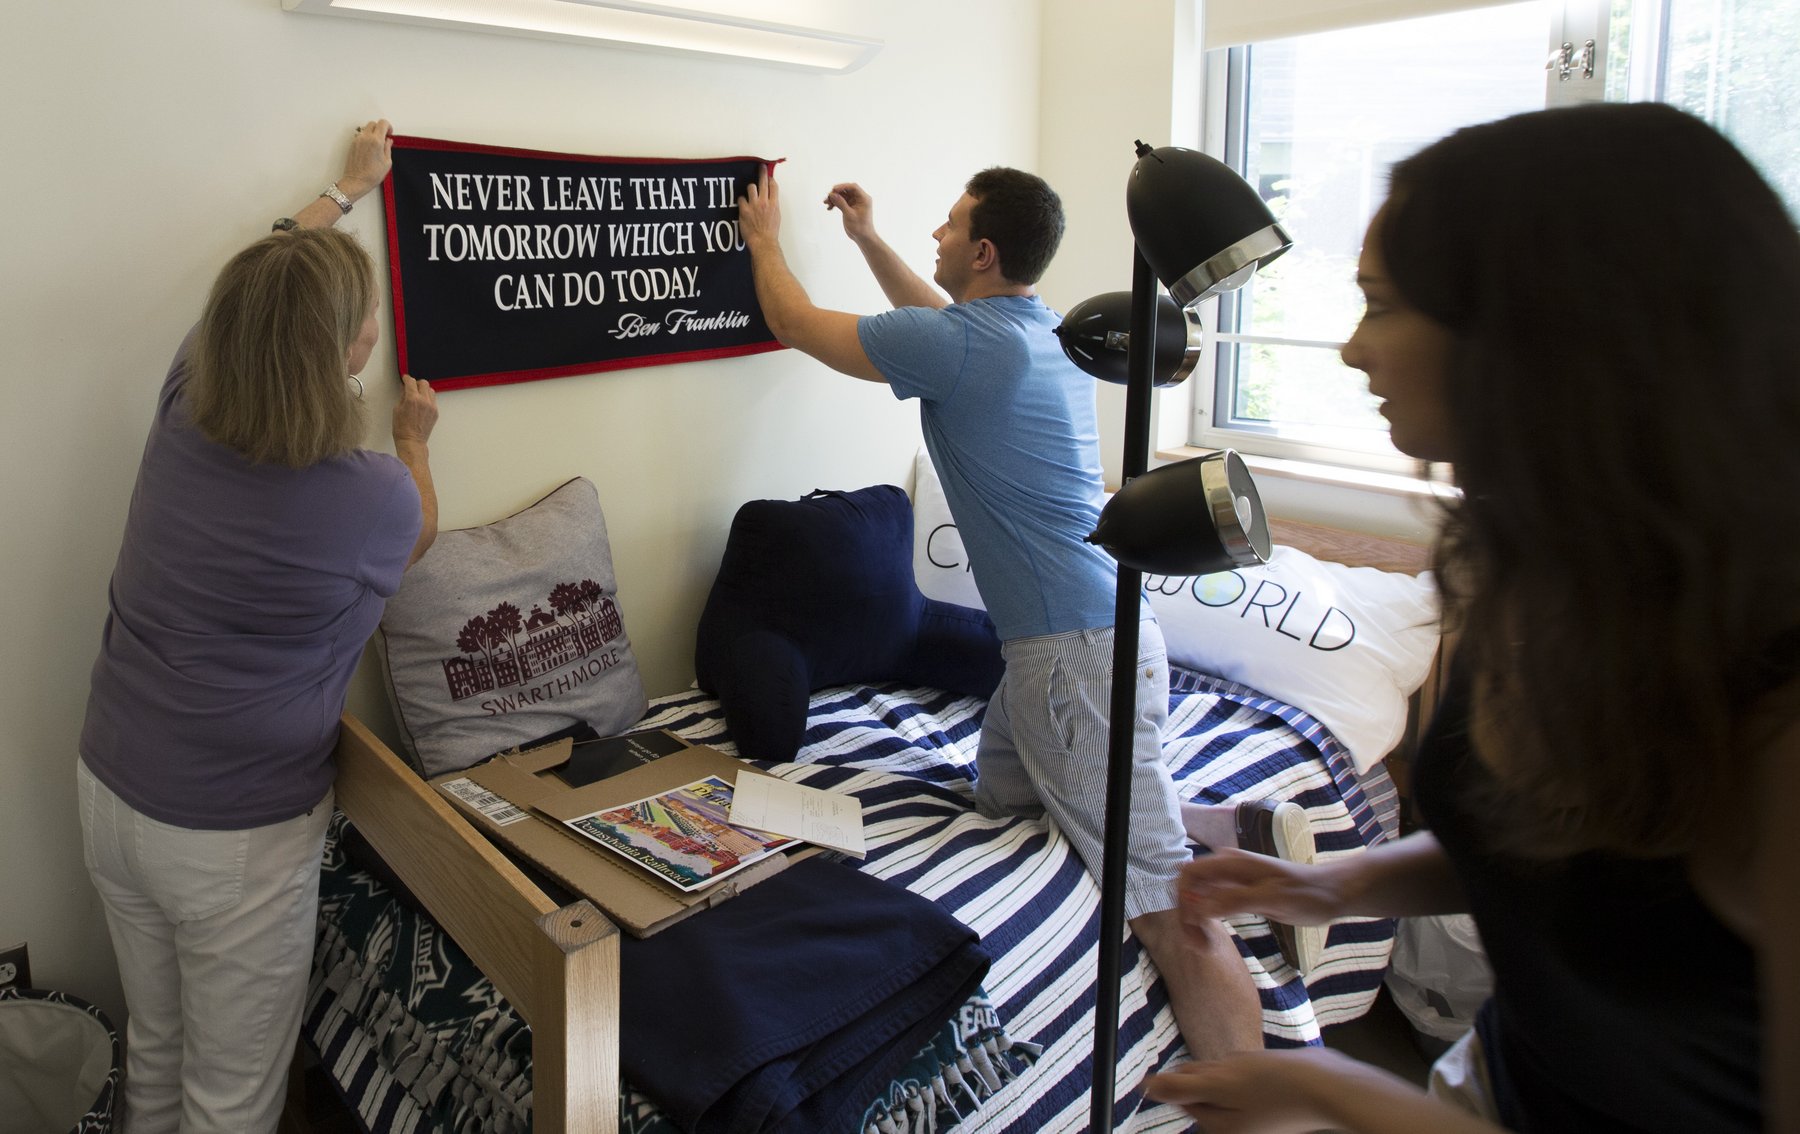 Student and parent hang decorative sign above the student's bed in a residence hall room. 